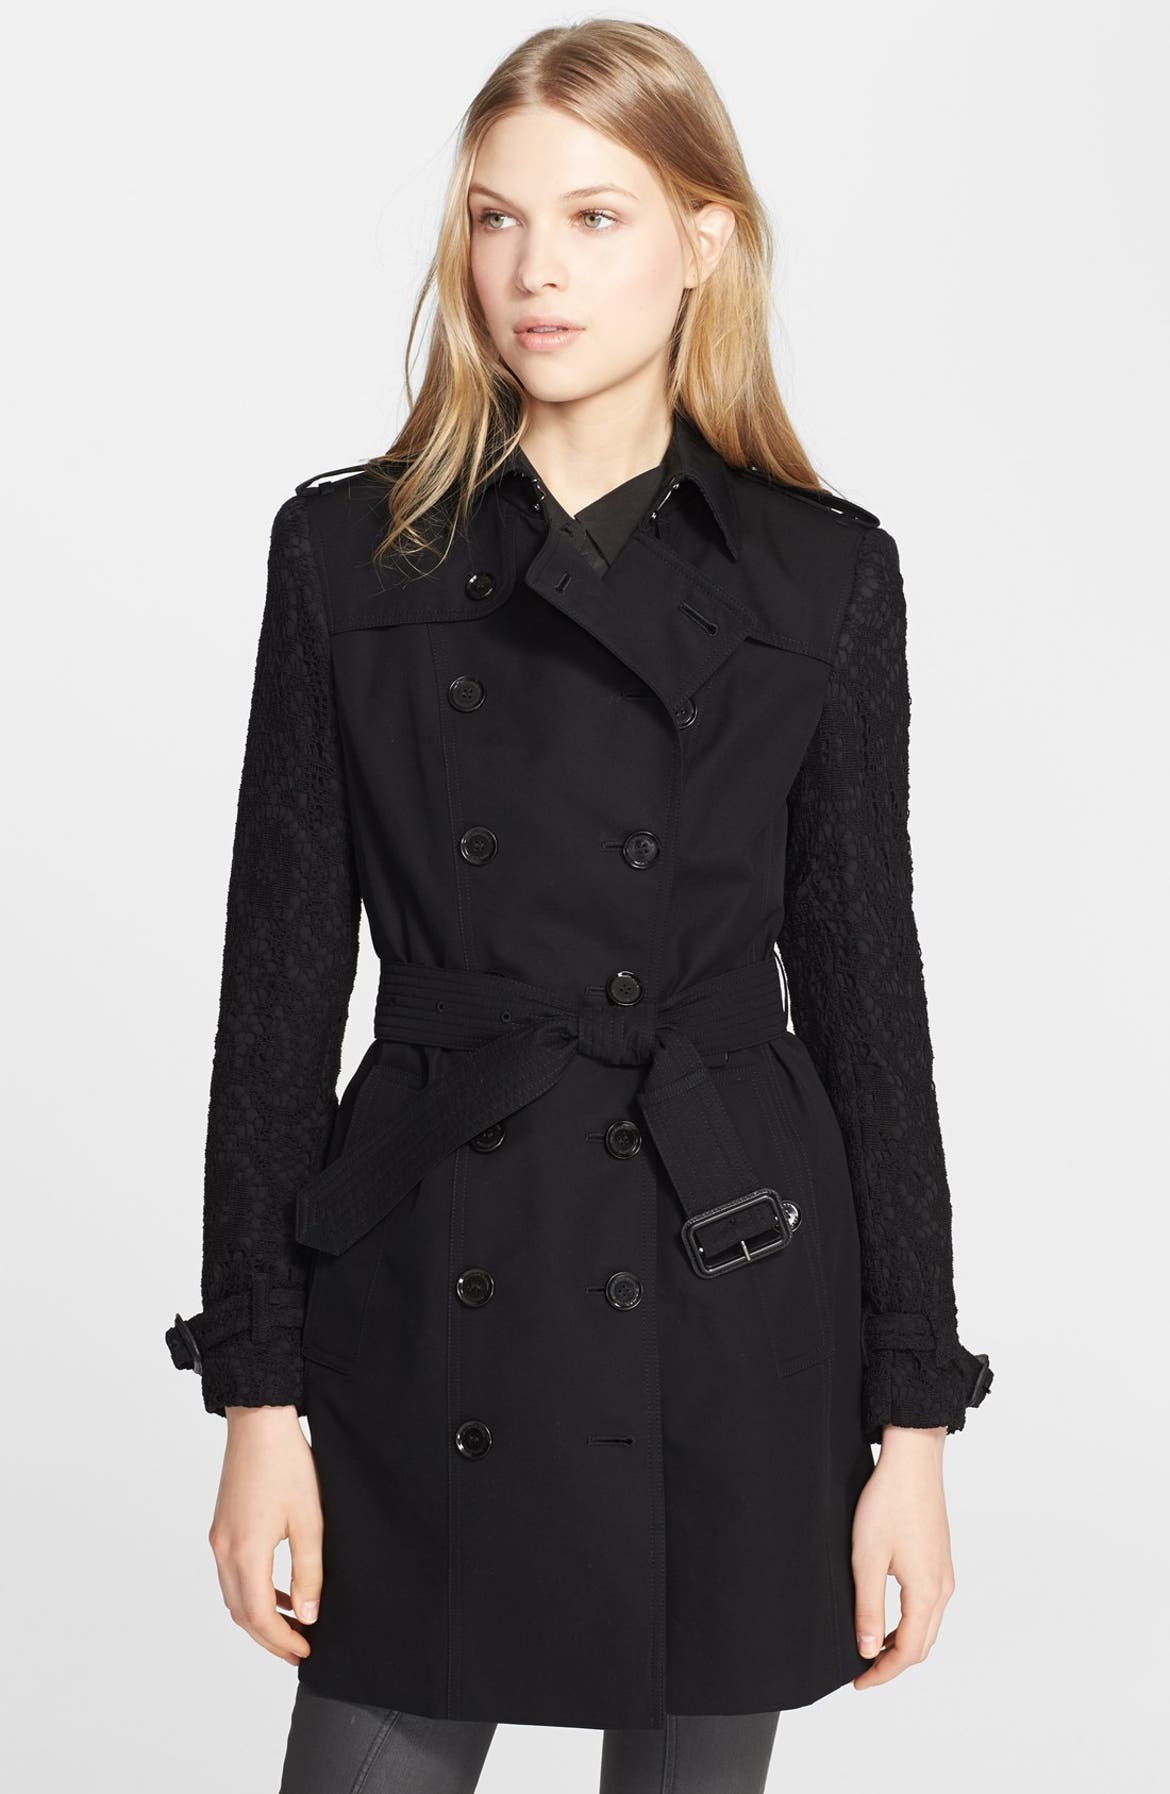 Burberry London Lace Sleeve Double Breasted Trench Coat | Nordstrom